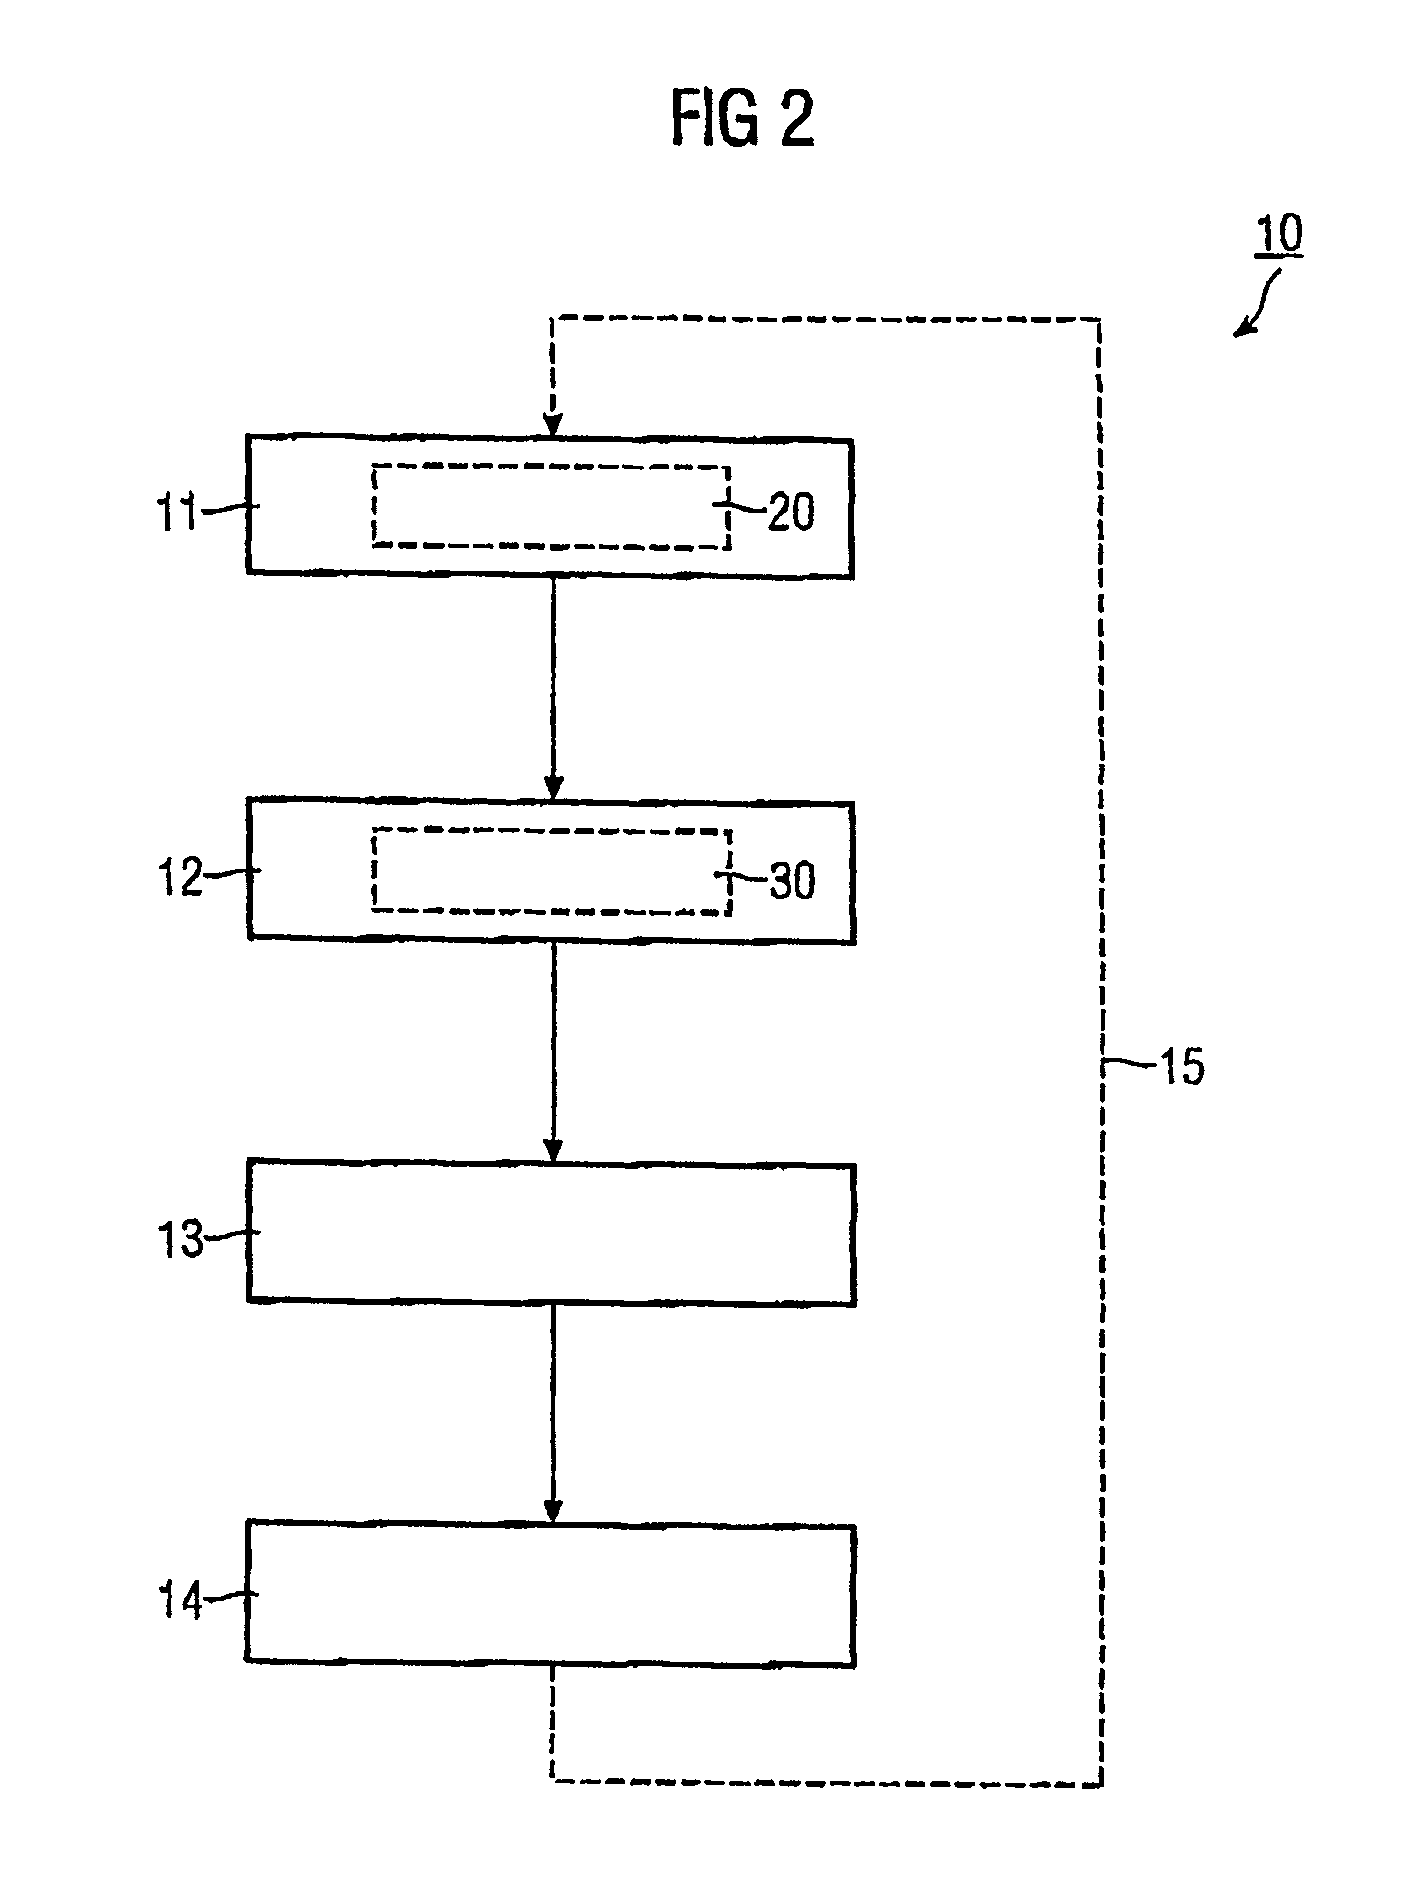 Method and system for reducing energy costs in an industrially operated facility